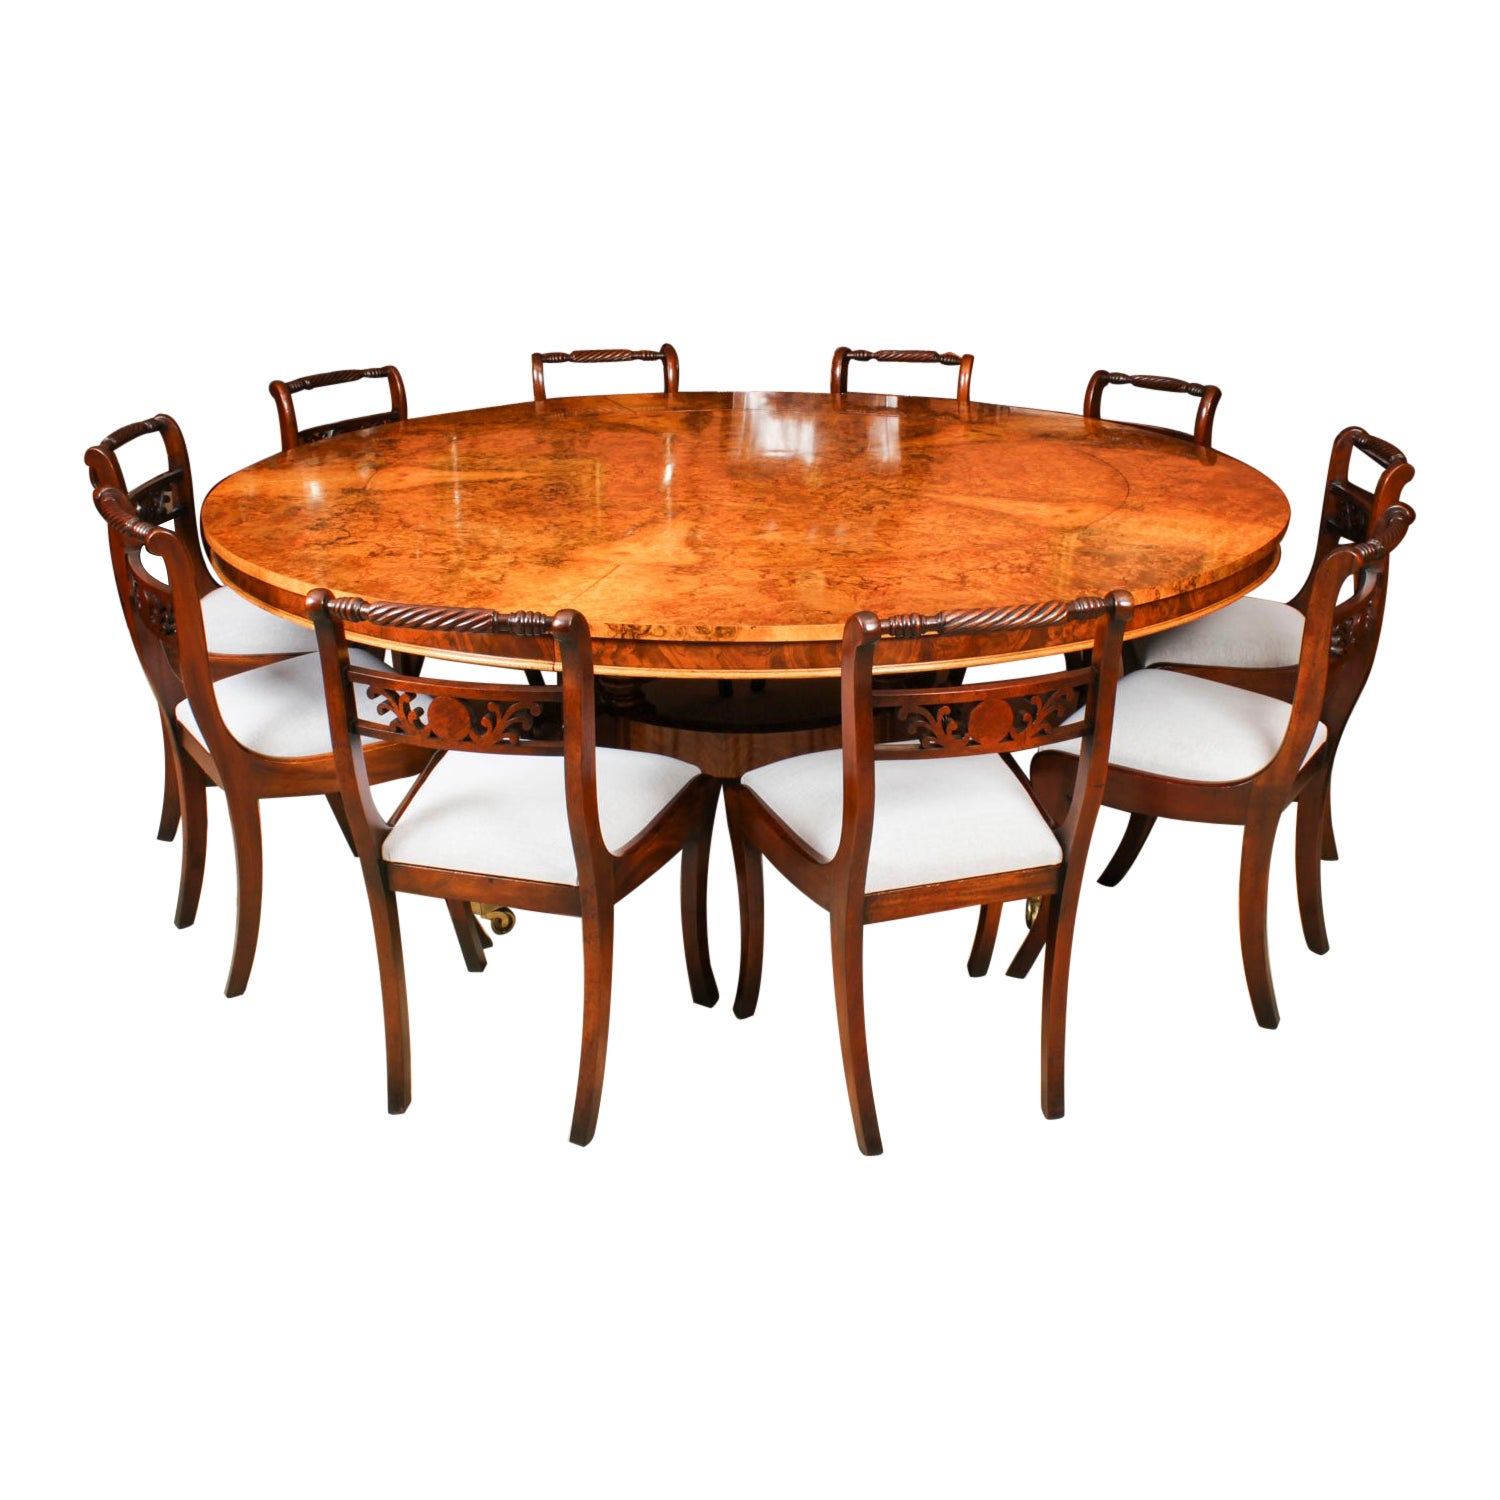 Antique 7ft diam Burr Walnut Jupe Dining Table C1900 & 10 chairs